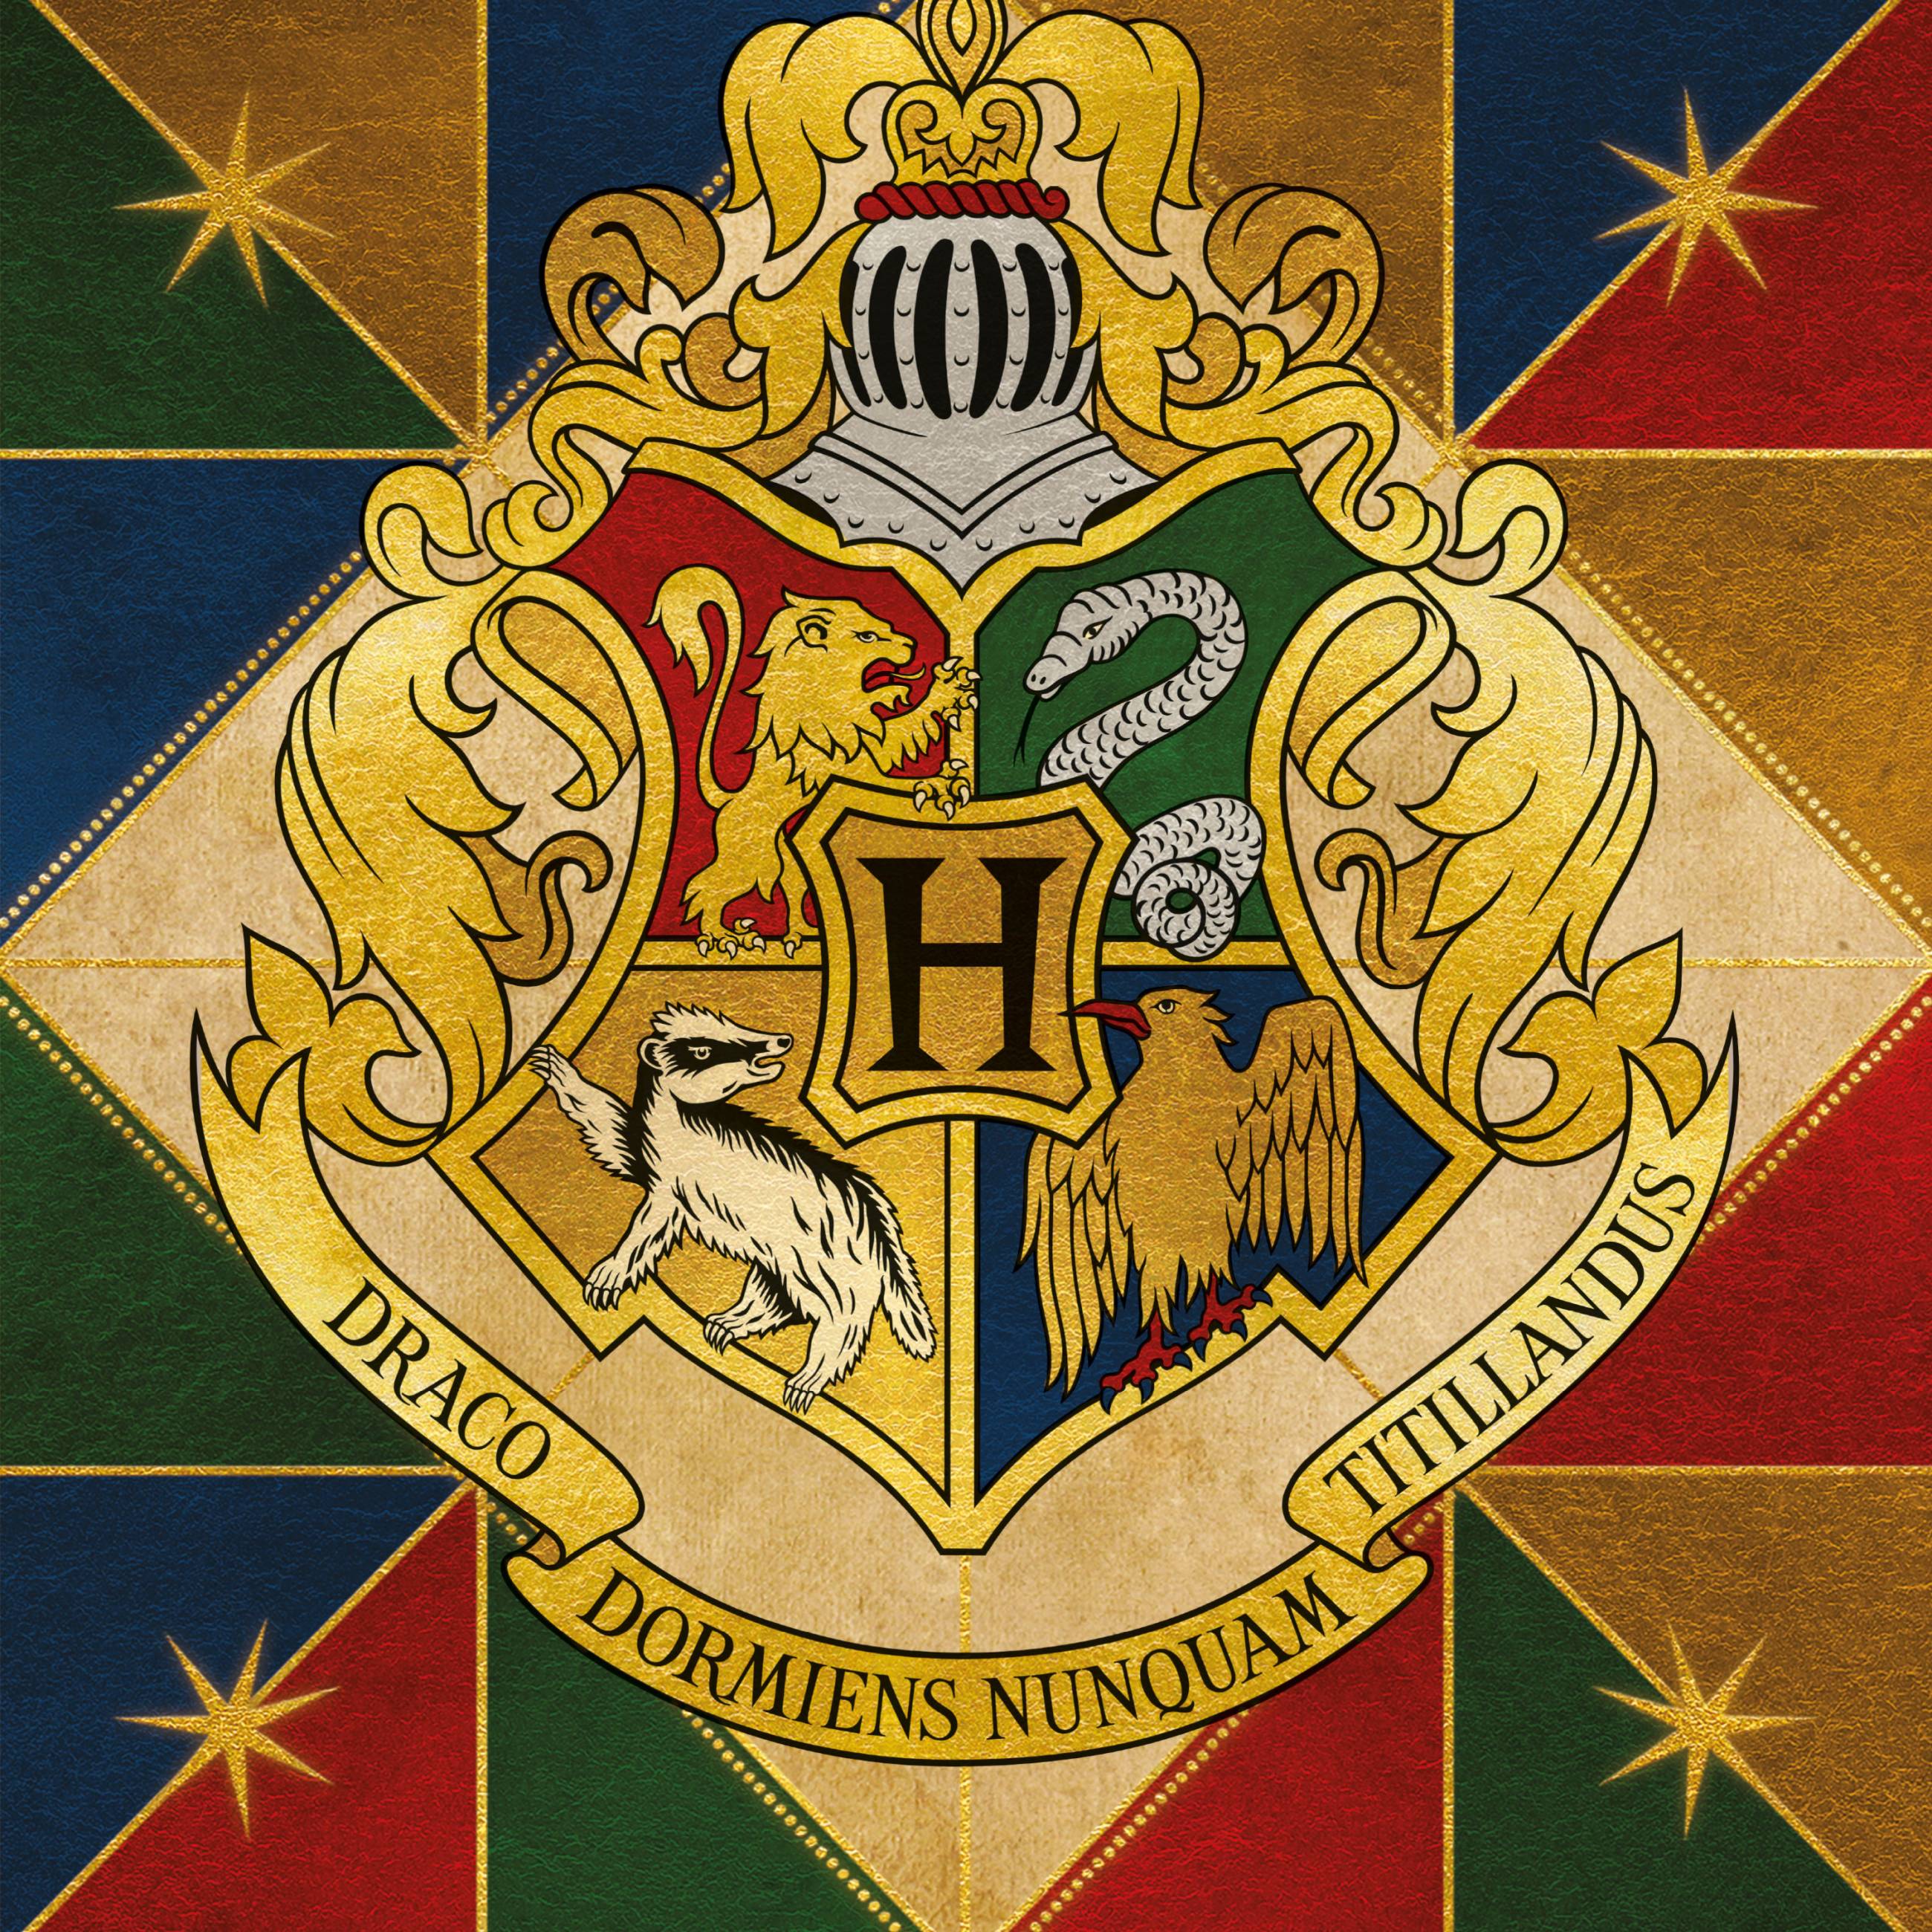 Slytherin Crest from Harry Potter Wall Mounted Official Cardboard Cutout -  Buy standups & standees at